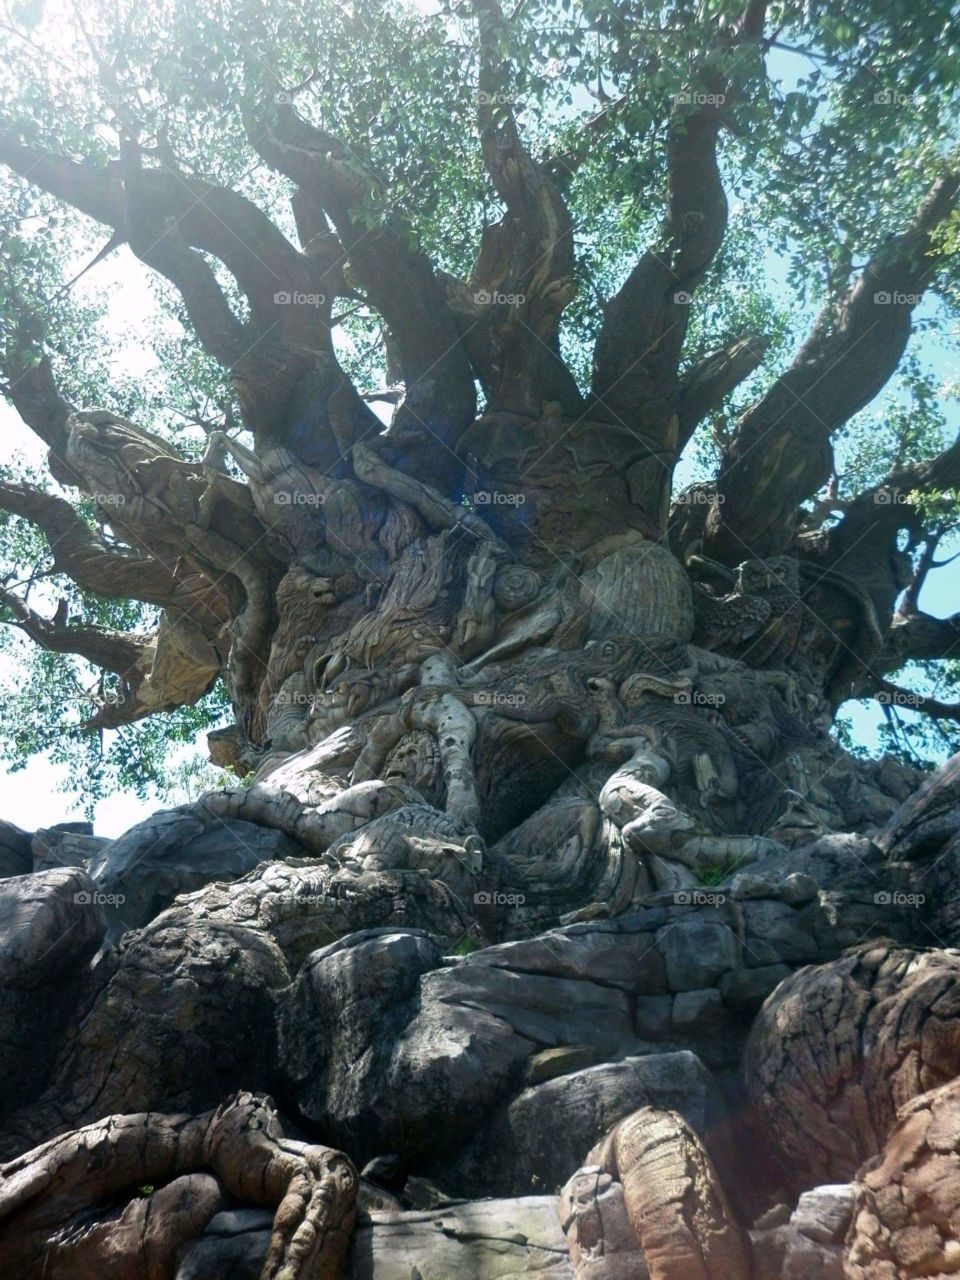 tree of life . saw this on my first trip to the magic Kingdom it's carved tree to represent the circle of life